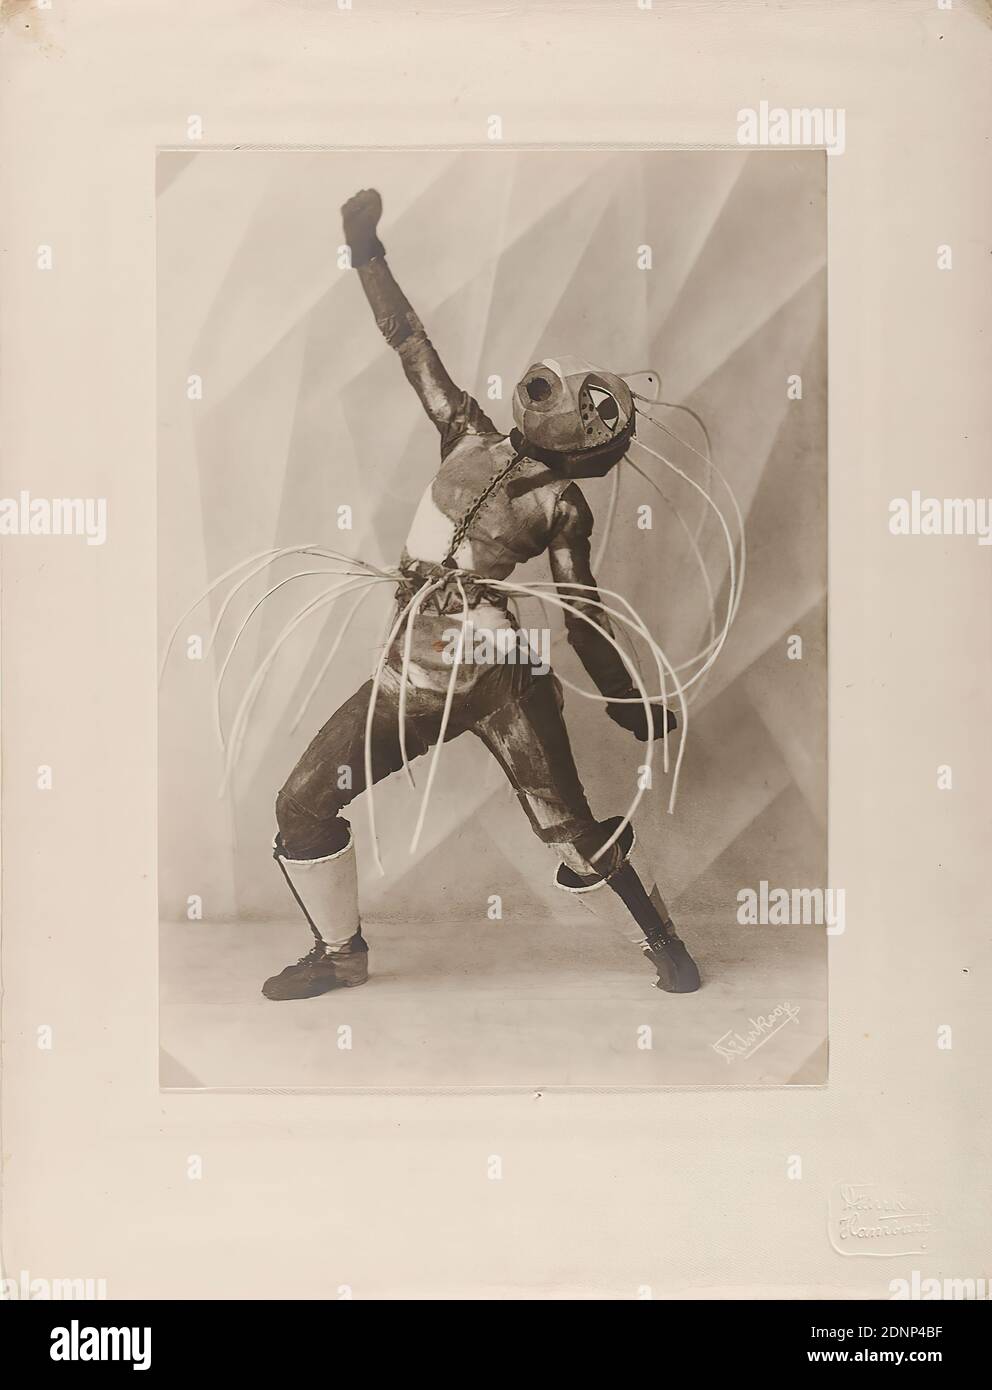 Minya Diez-Dührkoop, dance mask Toboggan Frau by Lavinia Schulz, silver gelatin paper, black and white positive process, image size: height: 22,40 cm; width: 16,10 cm, dry stamp: recto u. r. on the cardboard: Dührkoop, Hamburg, inscribed: recto u. r. on the cardboard handwritten in lead: Mus. f. Kunst u. Gewerbe Hamburg, old and new inv. no, repro no, Toboggan (2x); on verso and verso of the cardboard, handwritten in black: Tubogan; on verso and handwritten in lead: old inv. no, repro no, dimensions, signed: recto and right: Dührkoop, theater photography, dancing Stock Photo